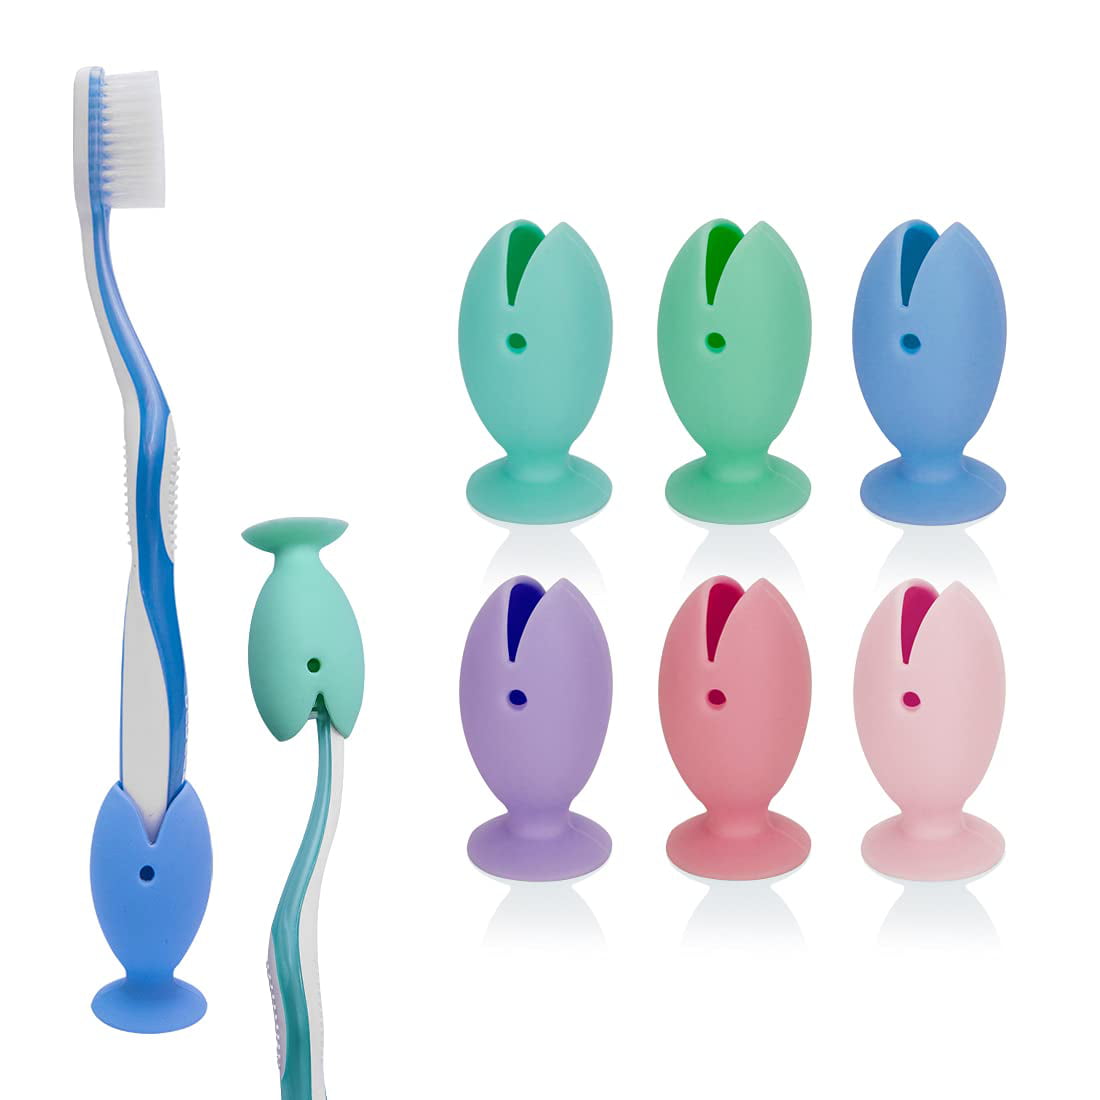 6pcs Slicone Anti-bacteria Toothbrush Head Cover Case Cleaner Guards Caps 